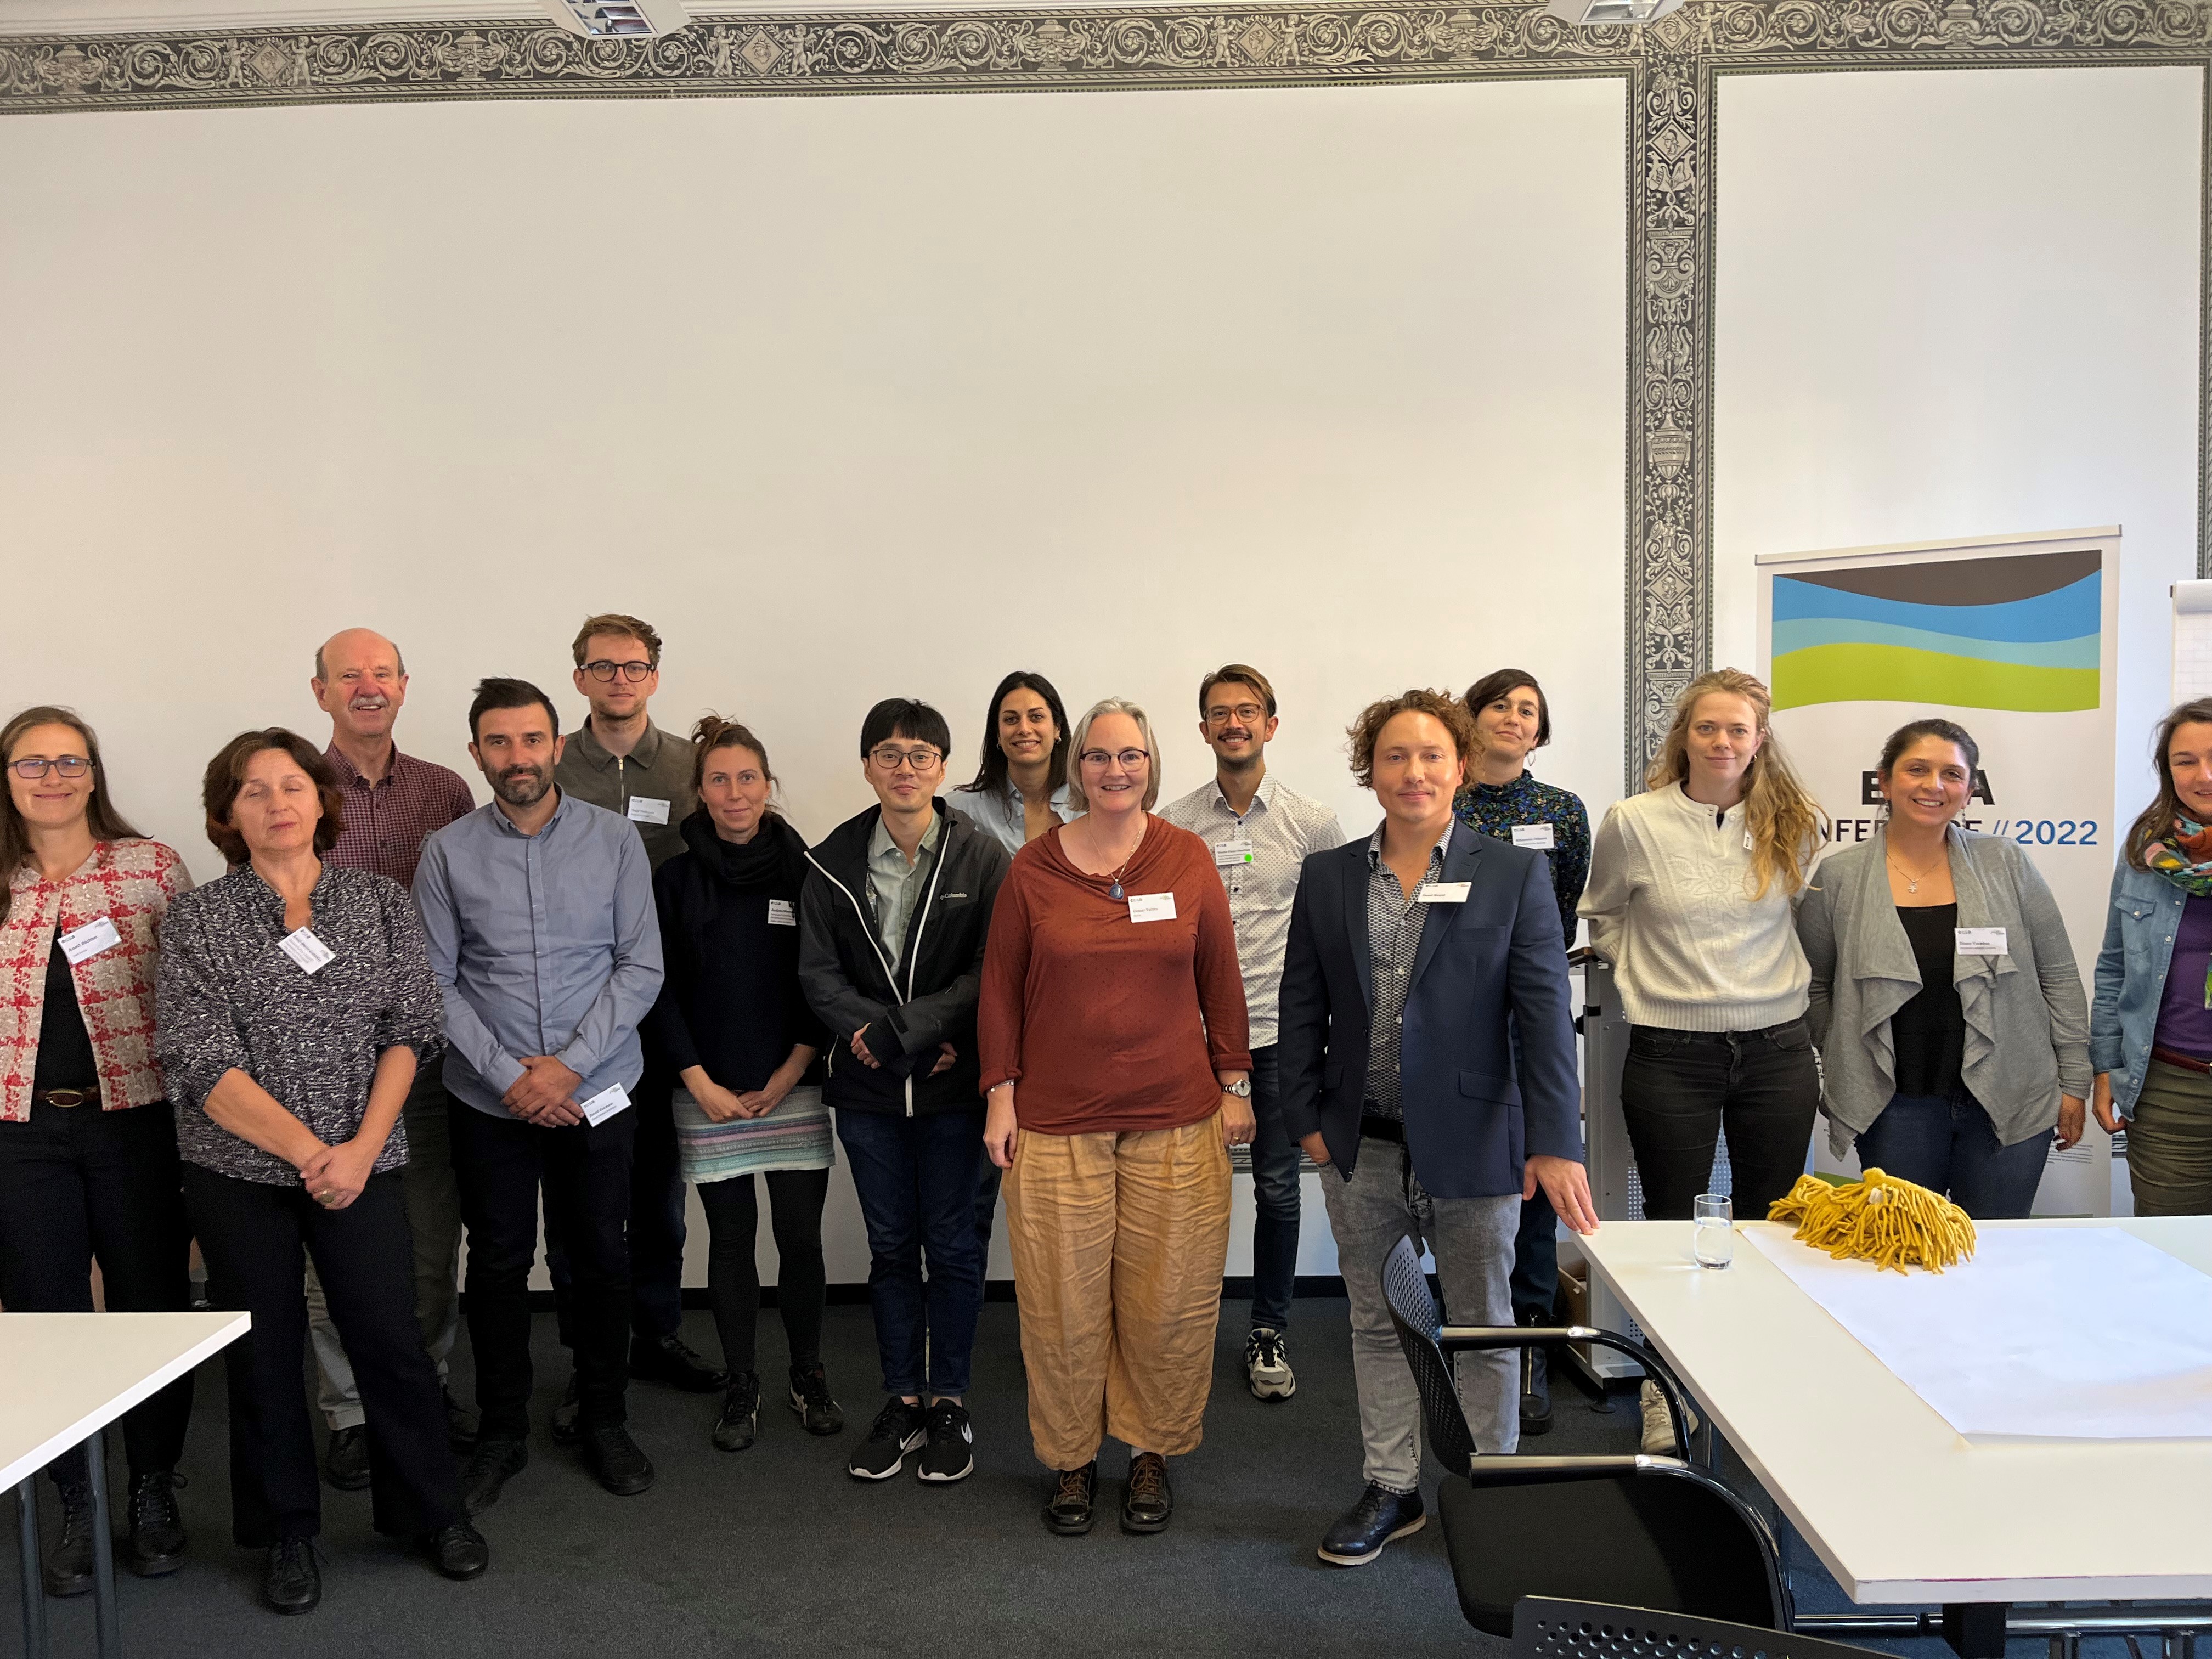 Group picture of the Air Quality session at the ECSA conference in Berlin 2022 